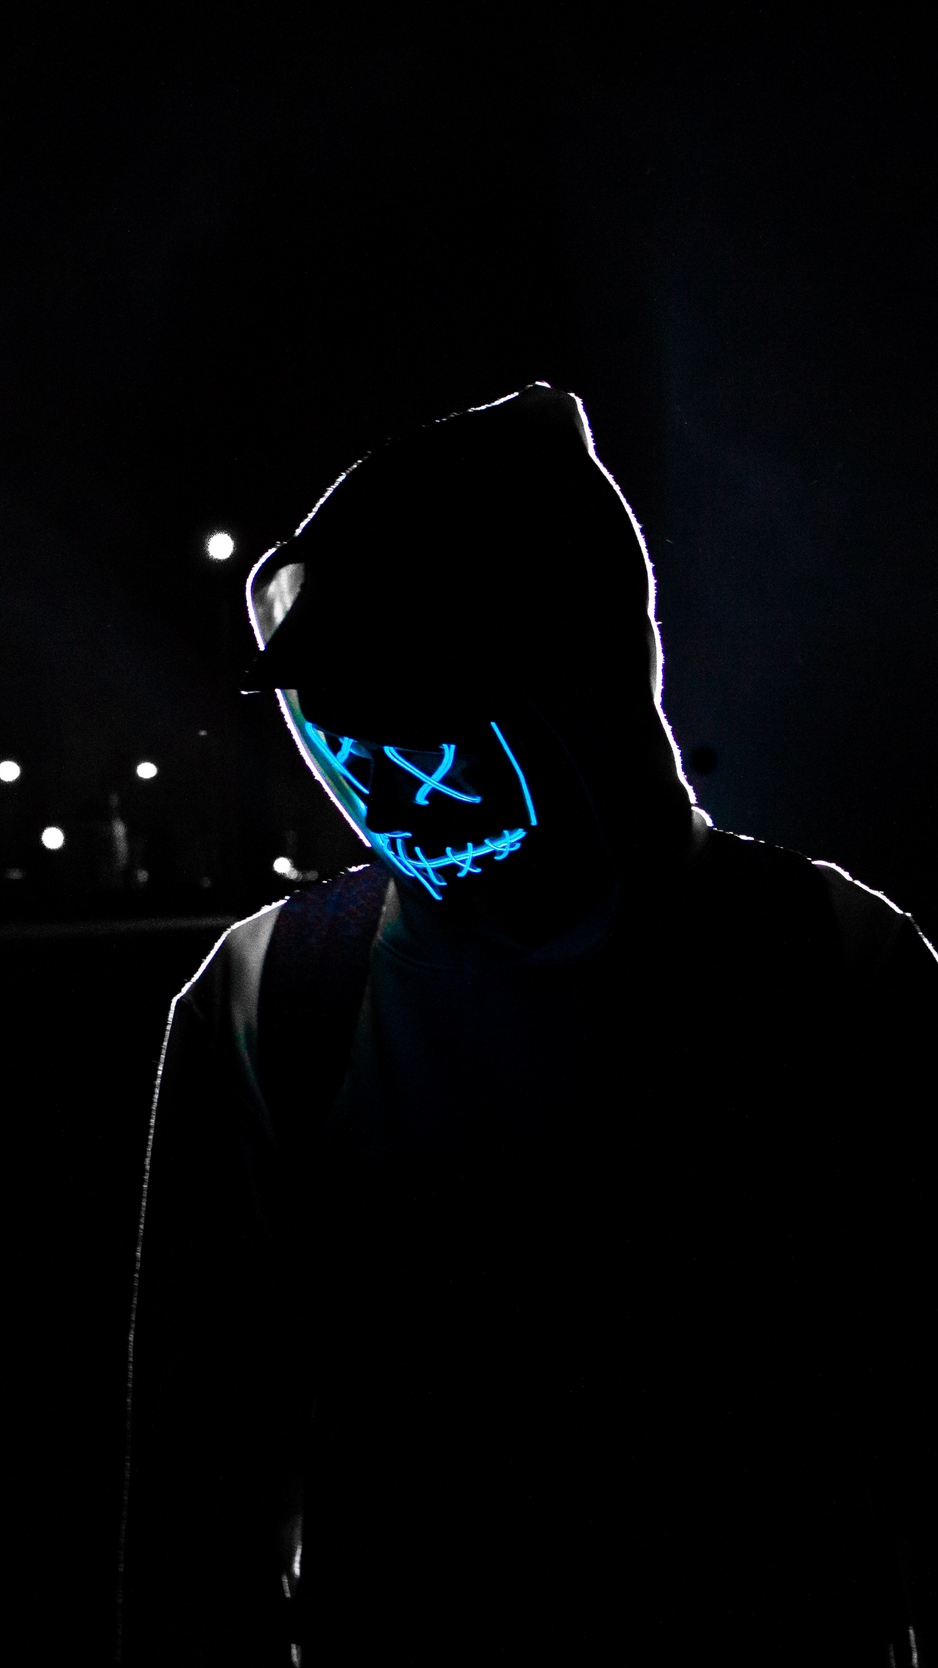 Wallpaper ID: 71688 / mask, hoodie, anonymus, neon, hd, 4k, photography  free download